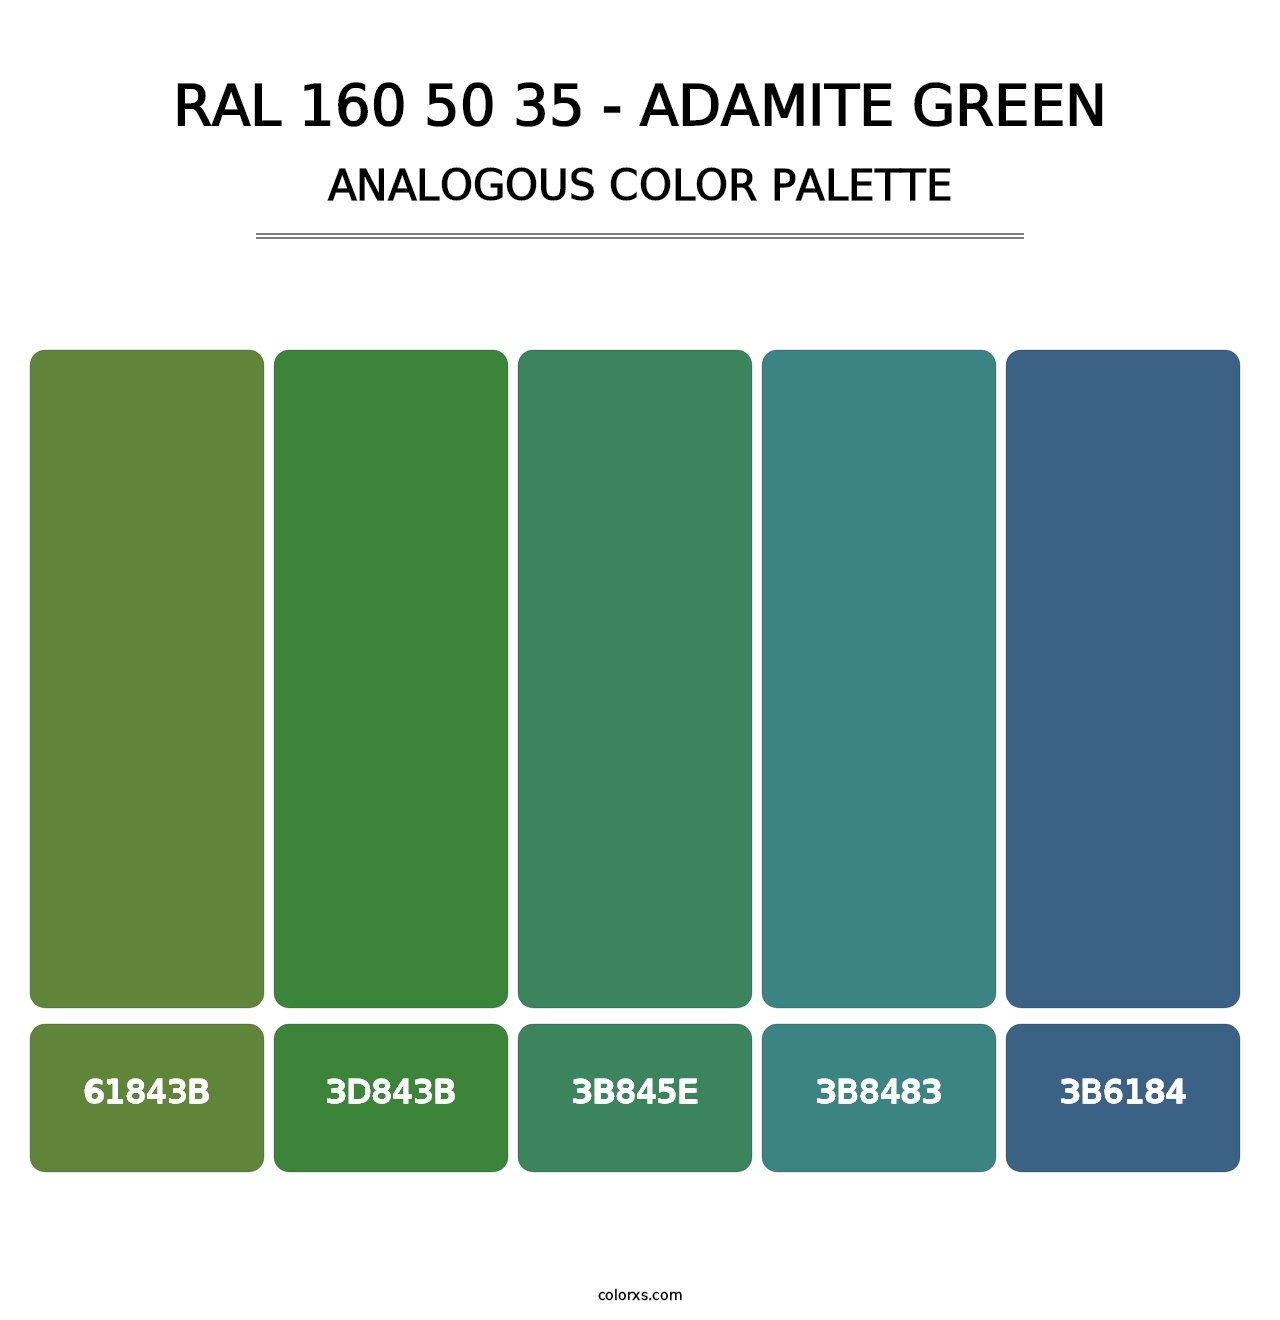 RAL 160 50 35 - Adamite Green - Analogous Color Palette